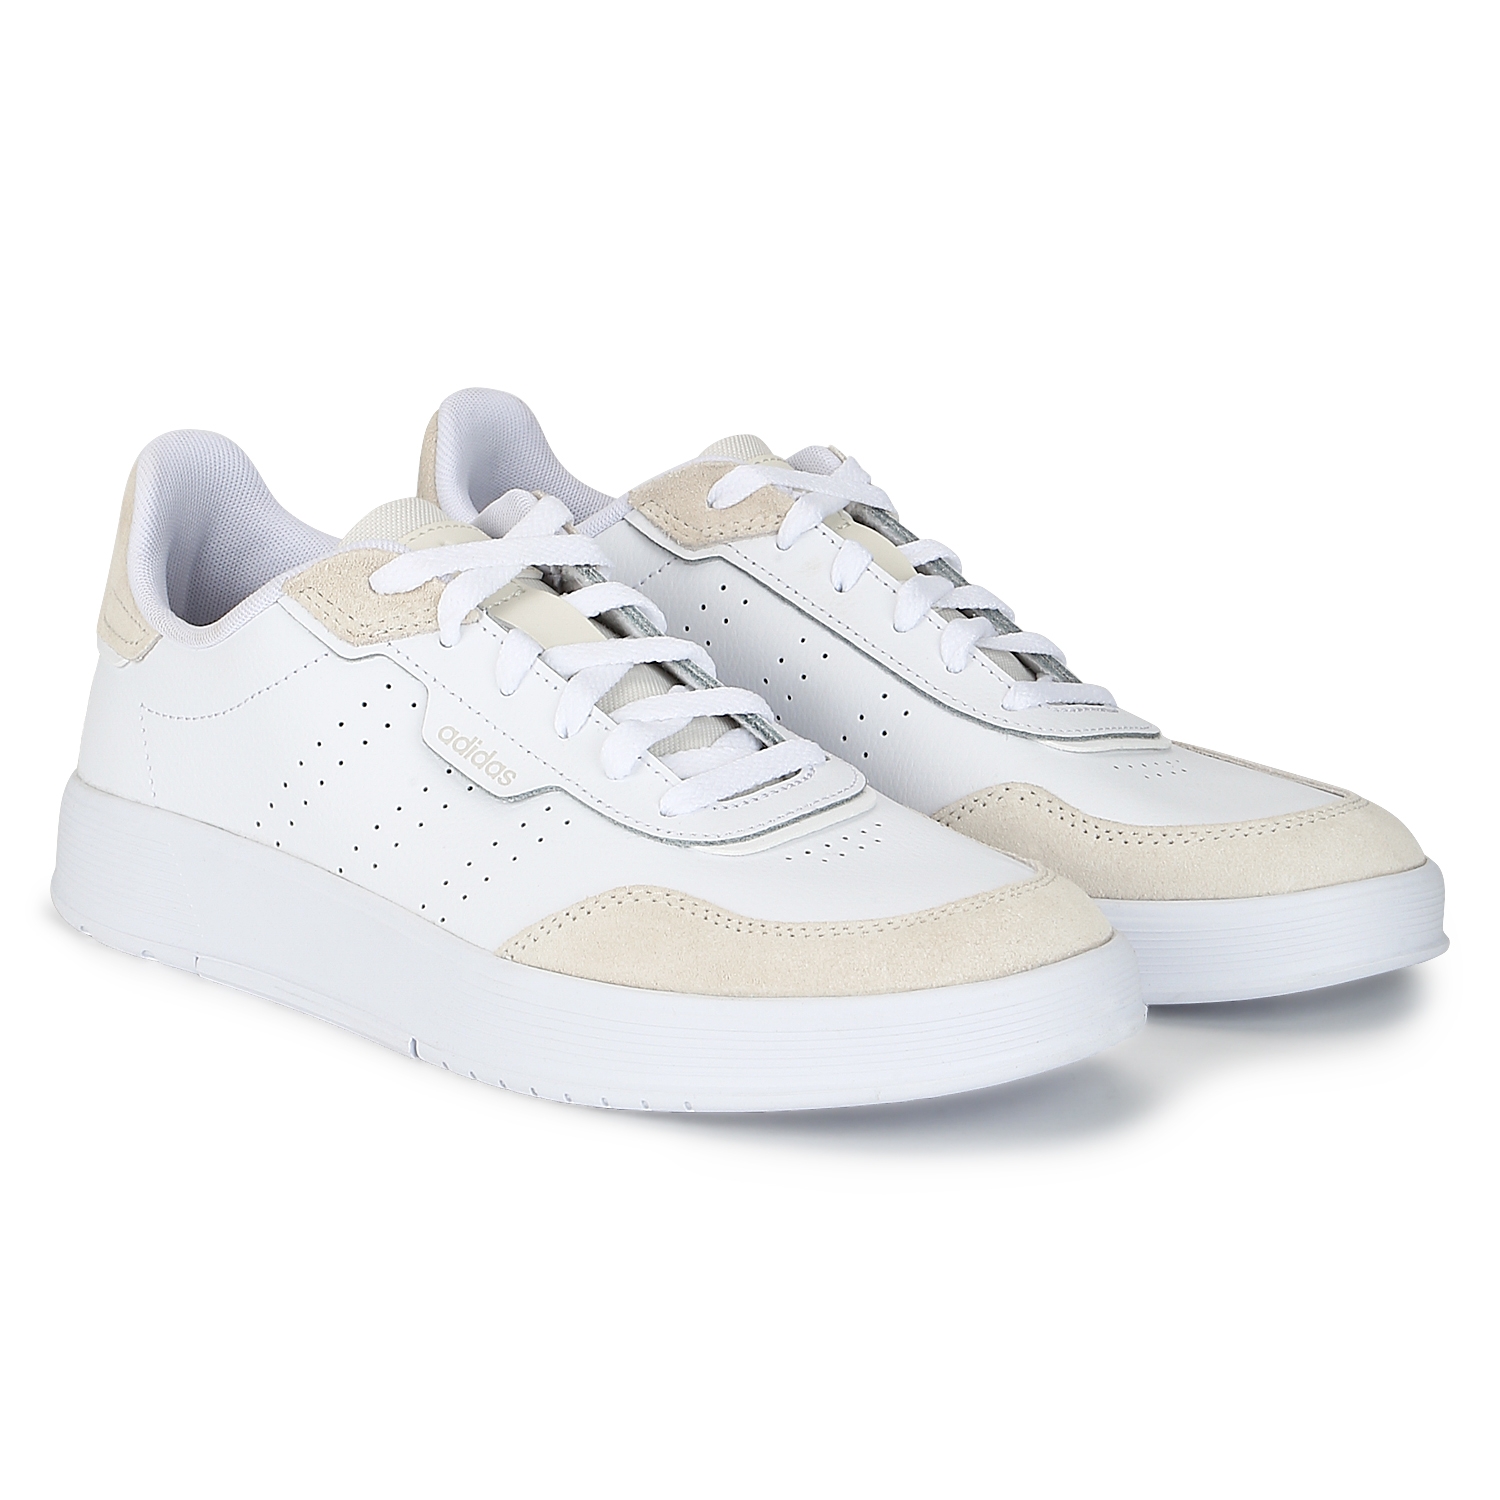 adidas | ADIDAS COURTPHASE TENNIS SHOE